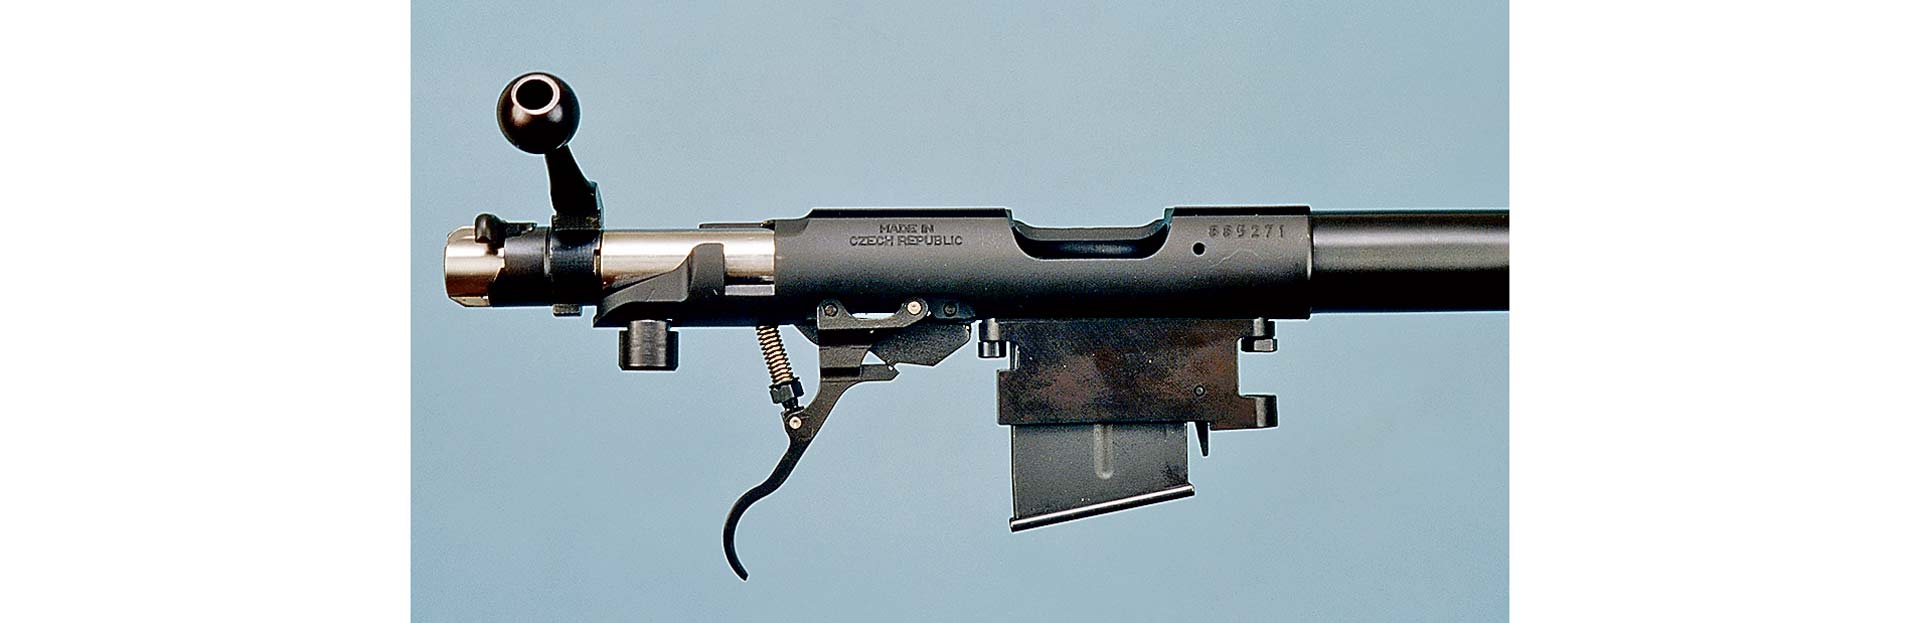 right side view of CZ452 rimfire receiver barreled action gun rifle parts